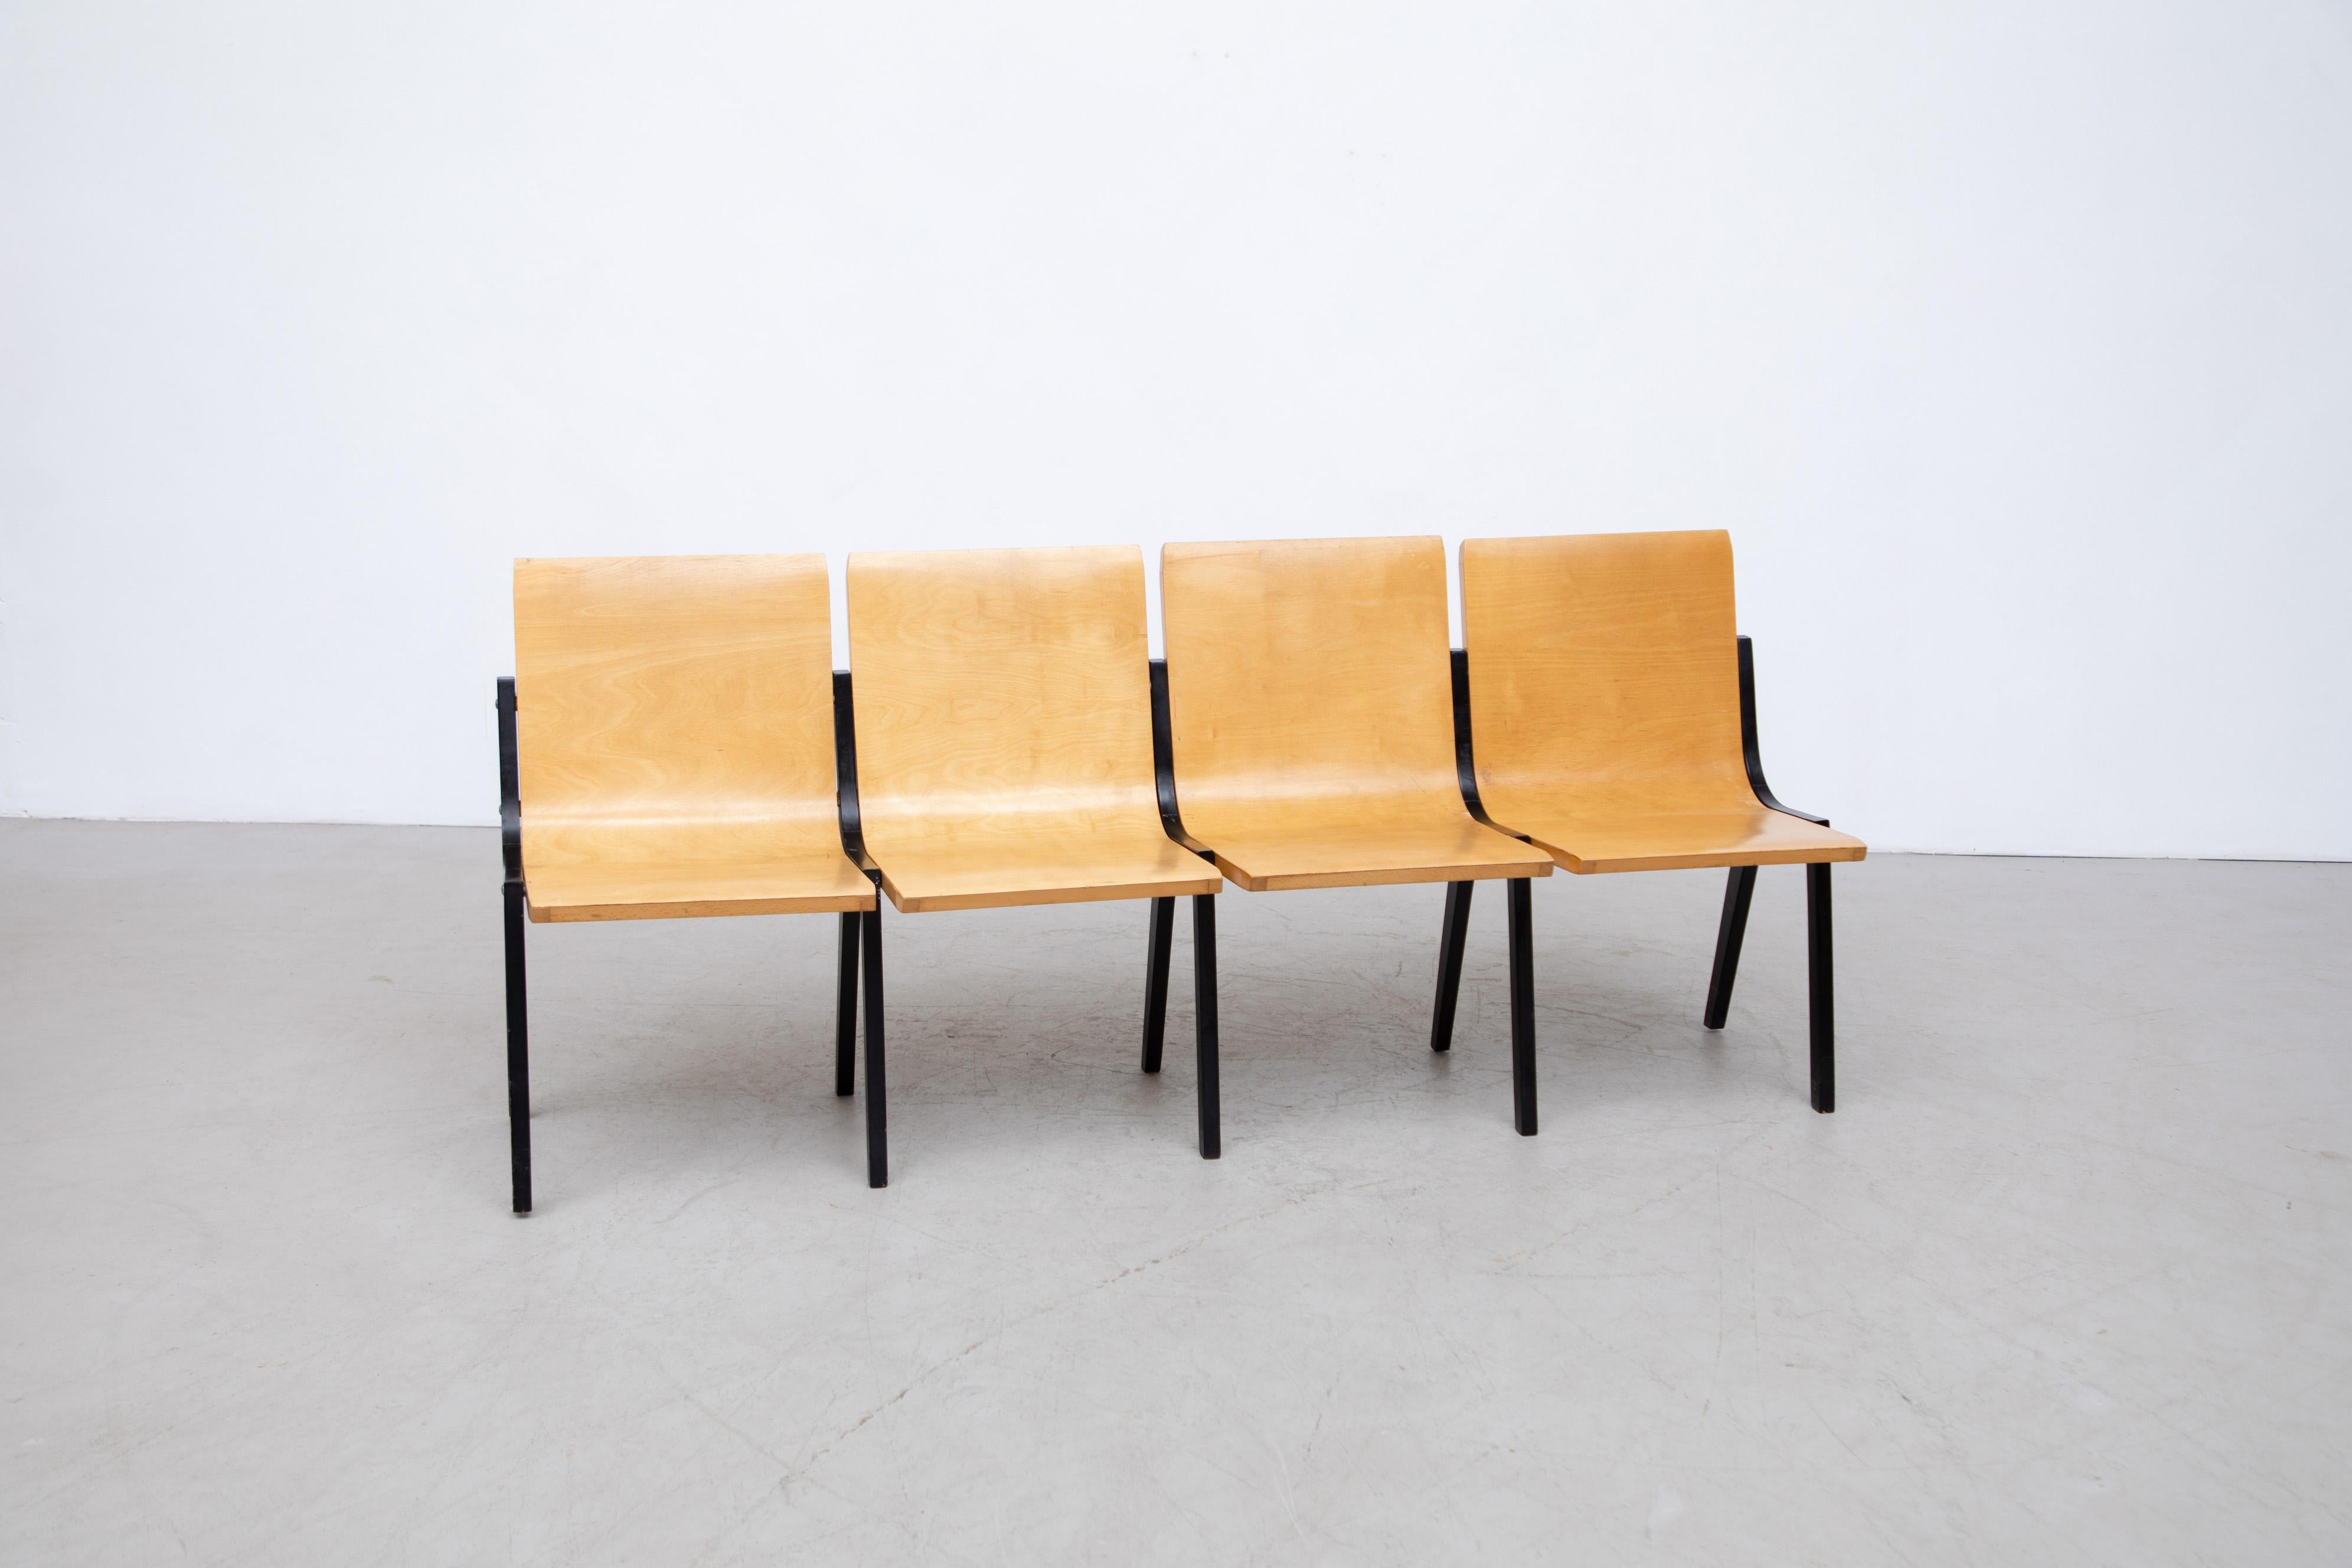 Roland Rainer 4 seat bench with bent beech plywood seating and black wood legs from a Dutch Church. In original condition with visible patina and signs of wear consistent with its age and use. Other sizes available in 2, 3 and 5 seaters